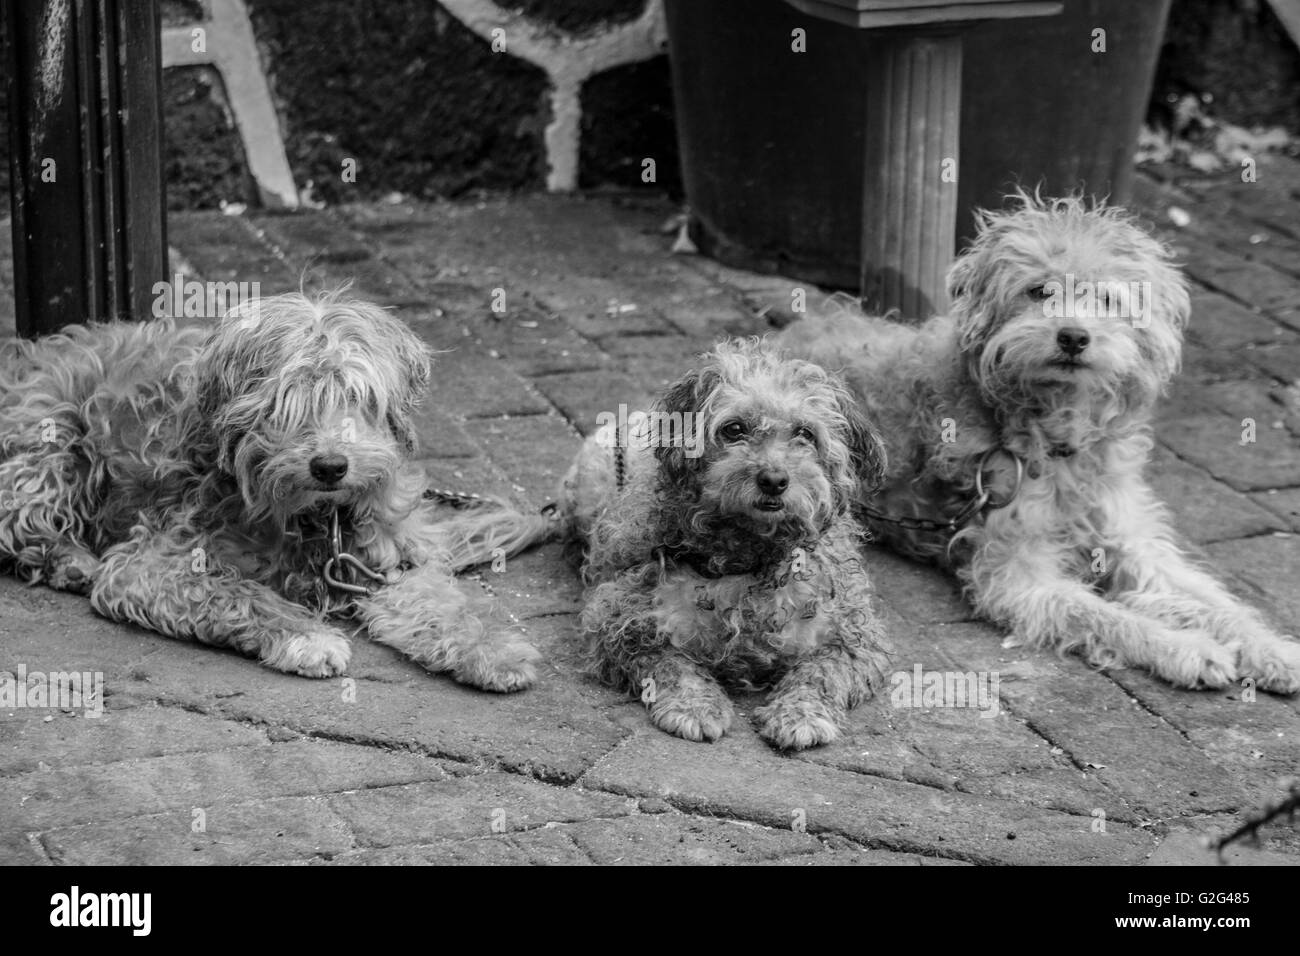 Port of Three Shaggy Dogs in Street Stock Photo